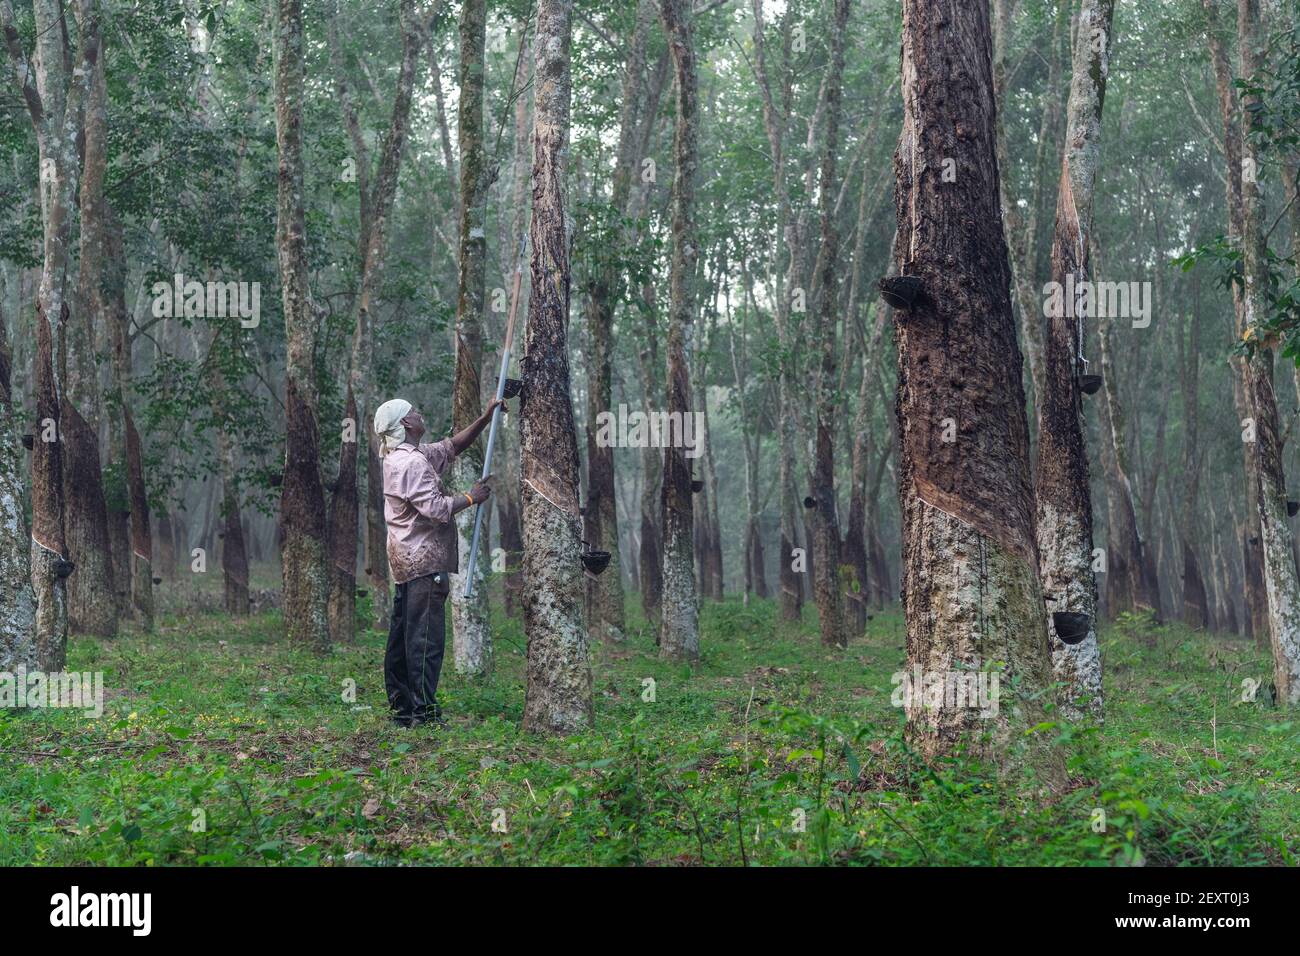 Indian Farmer rubber tapping rubber tree in tamil nadu on a misty morning Stock Photo